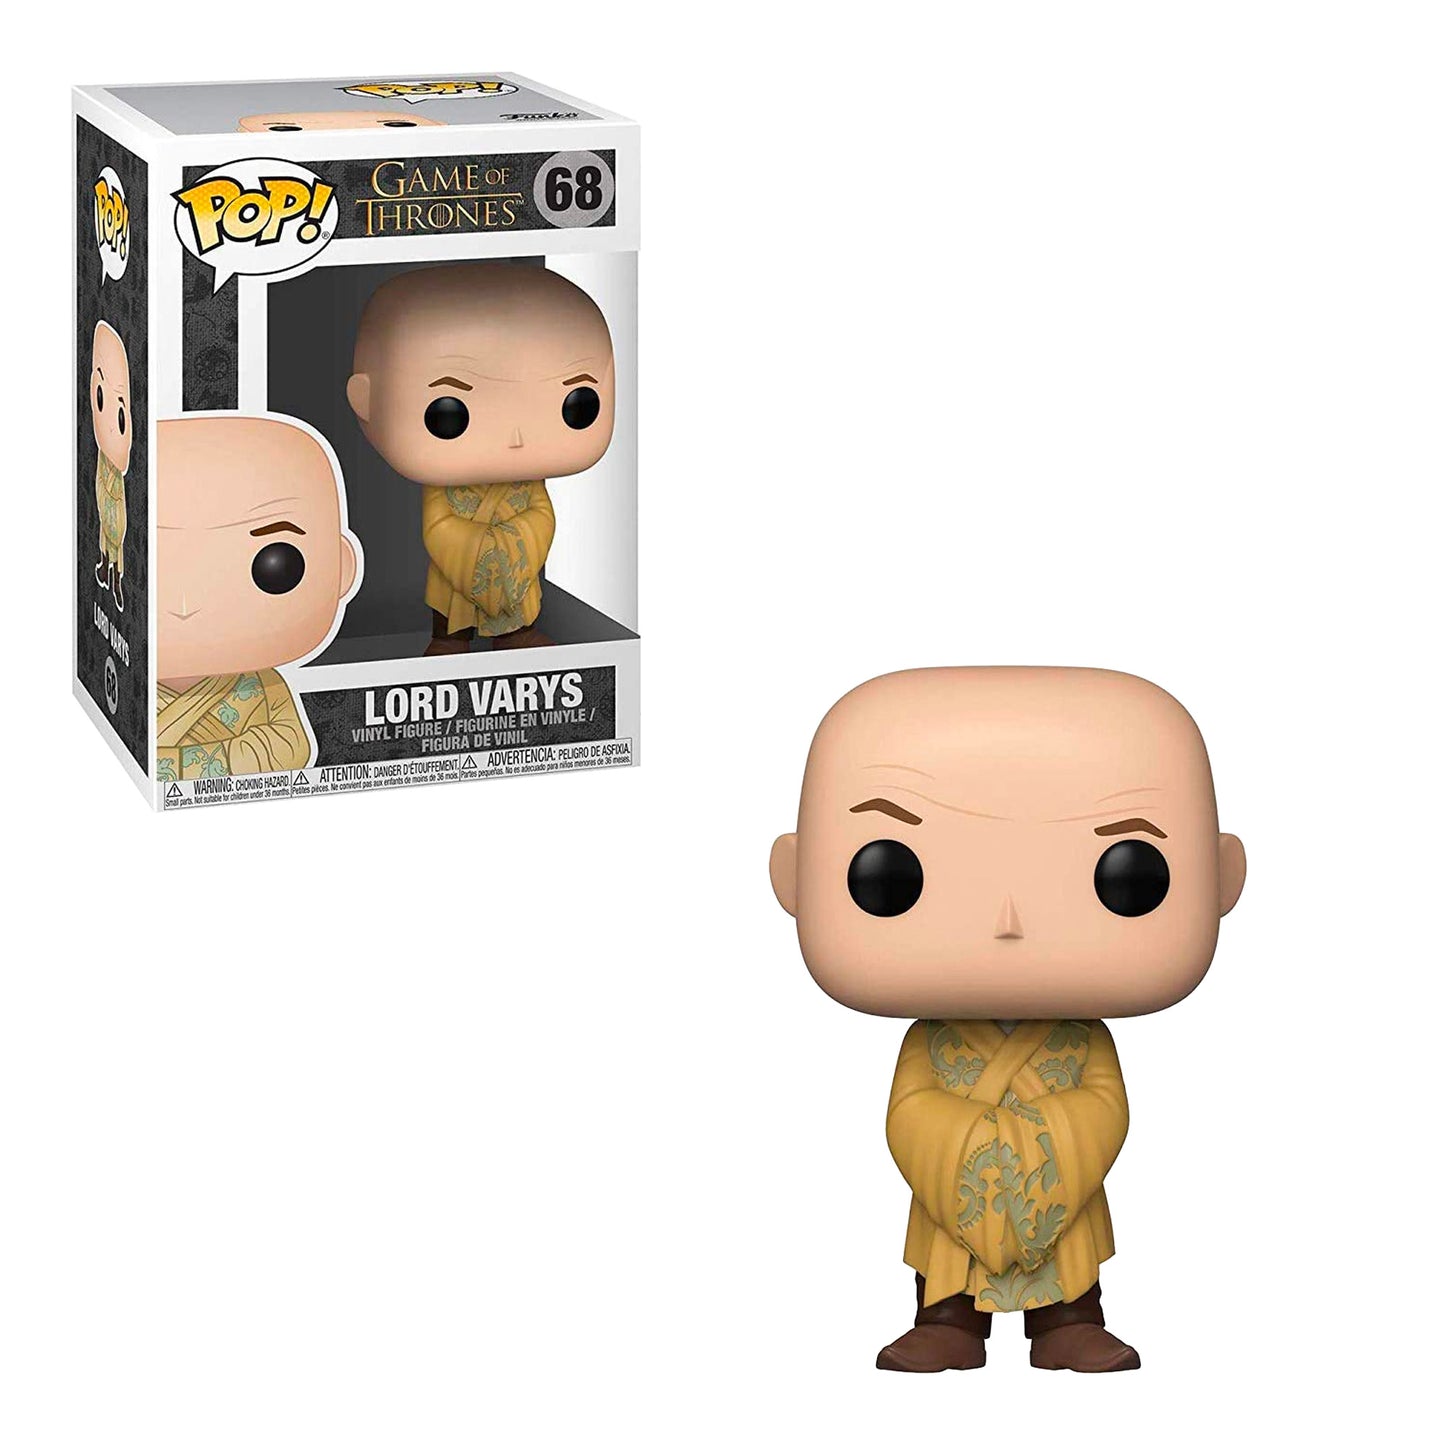 Funko Pop! Television: Game of Thrones - Lord Varys #68